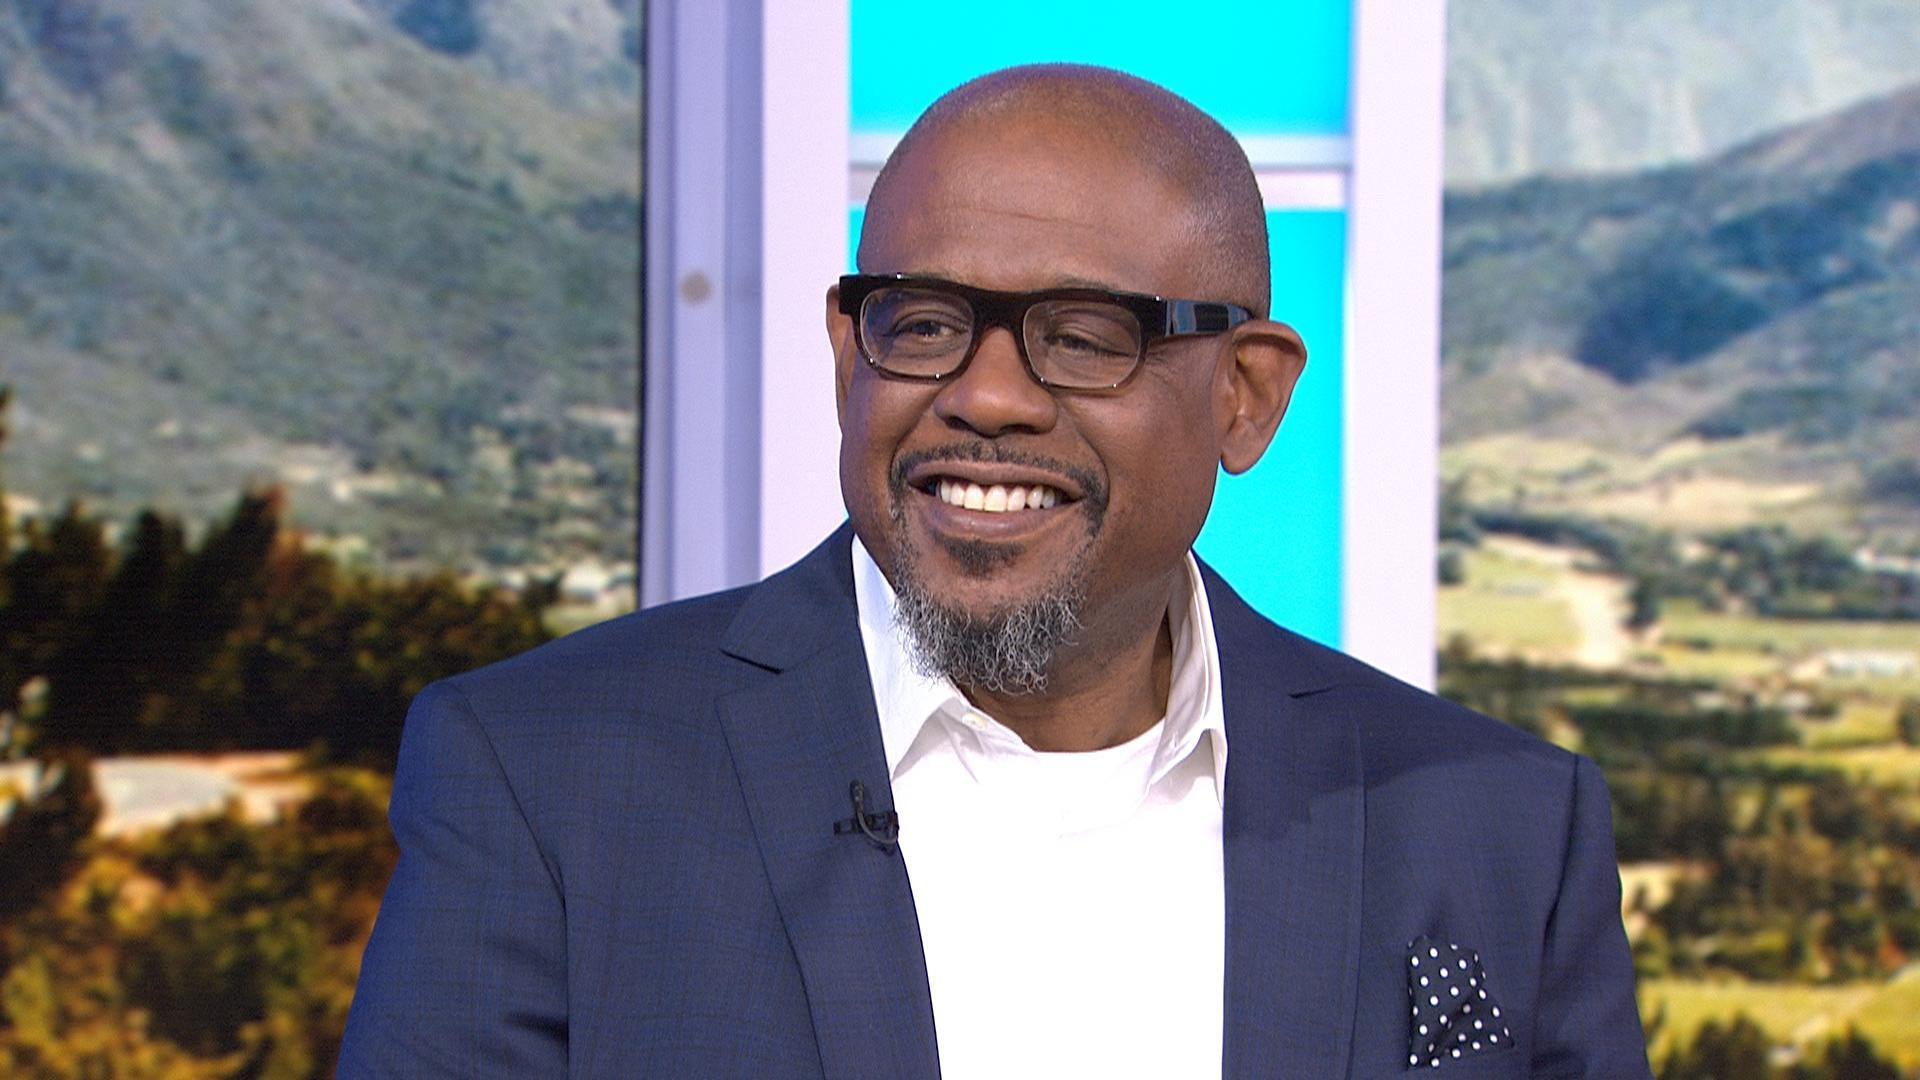 Forest Whitaker talks about playing Desmond Tutu in 'The Forgiven'